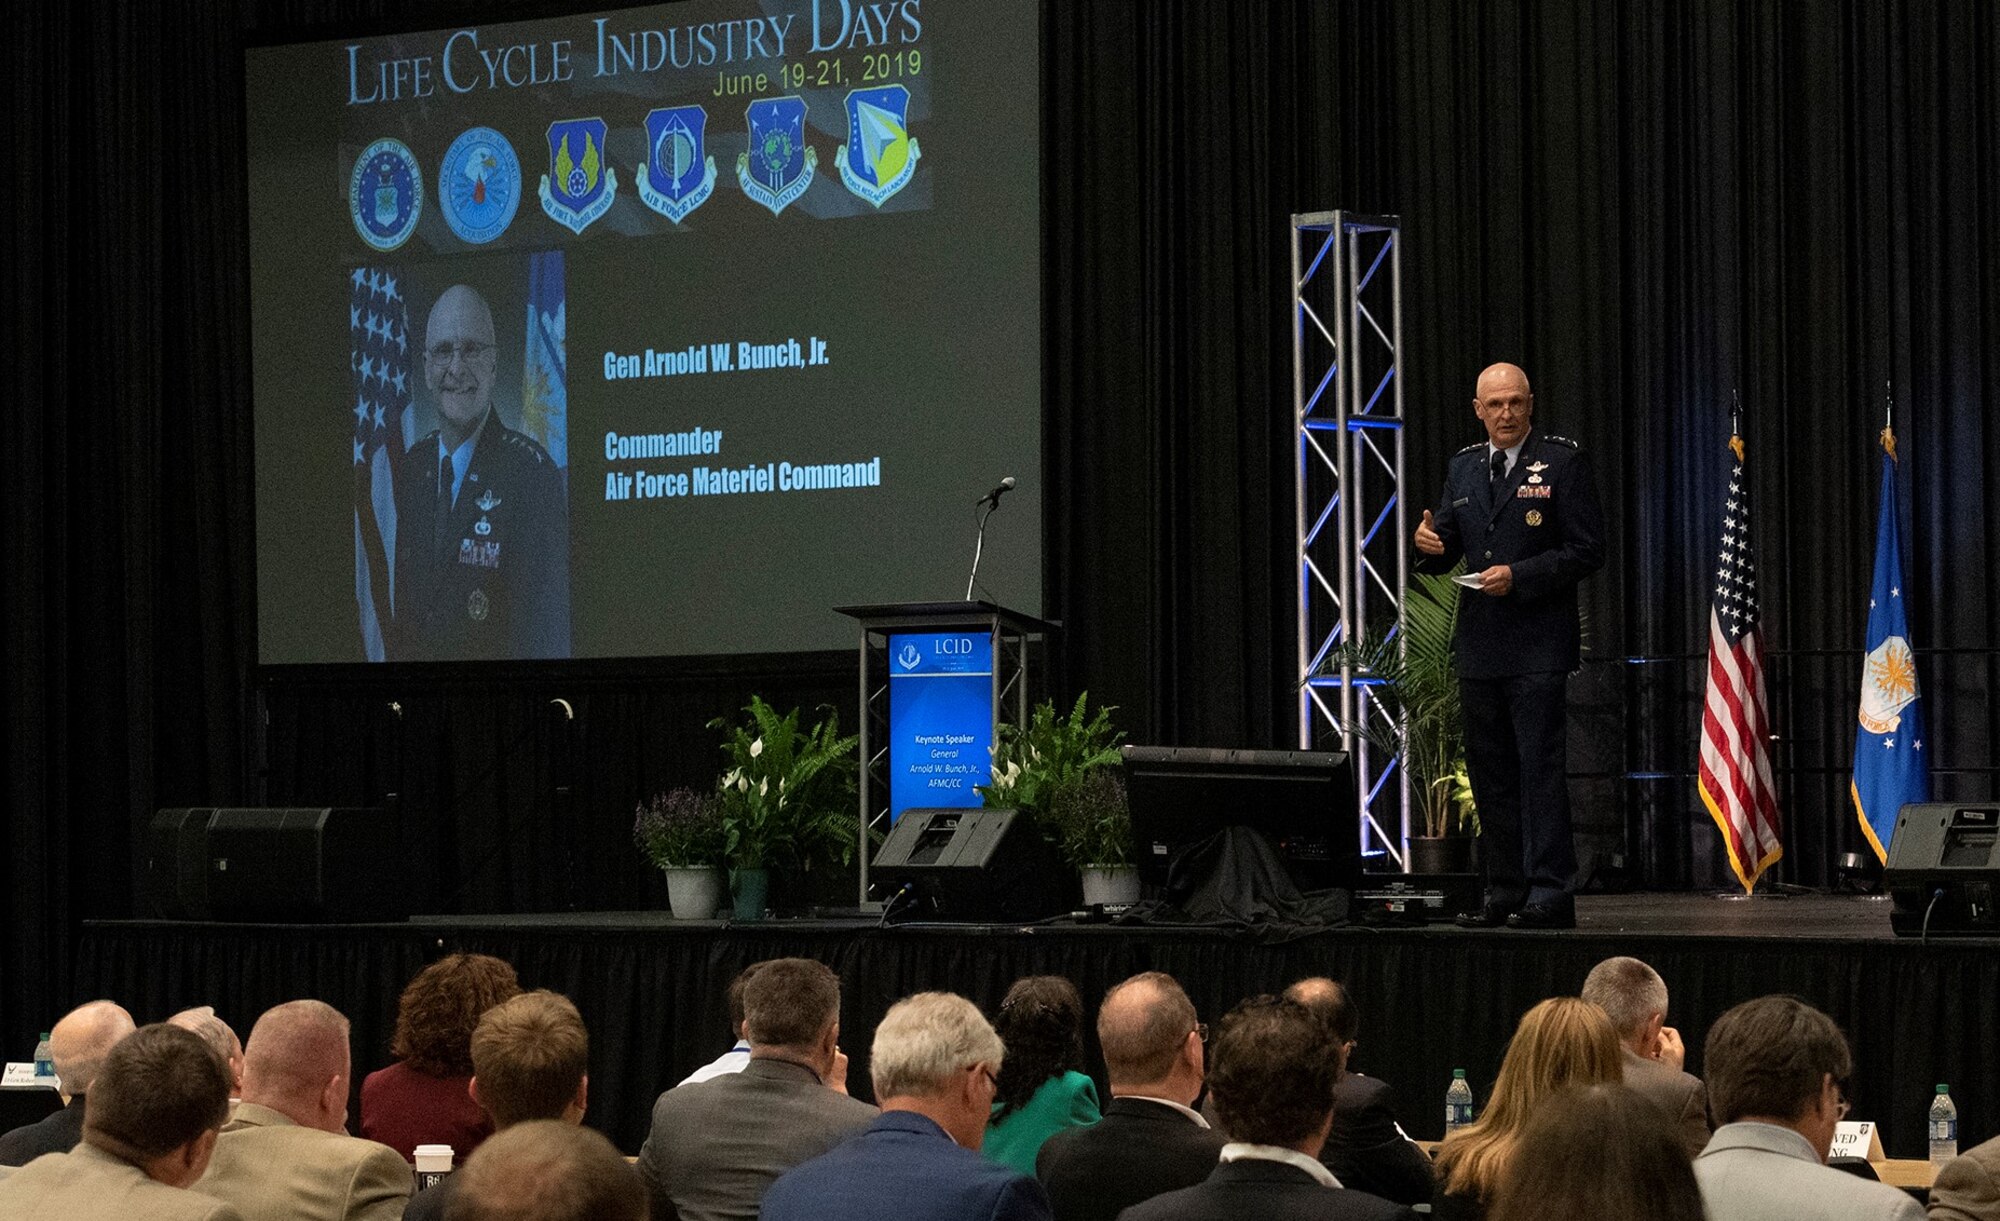 Gen Bunch speaks at Life Cycle Industry Days 2019